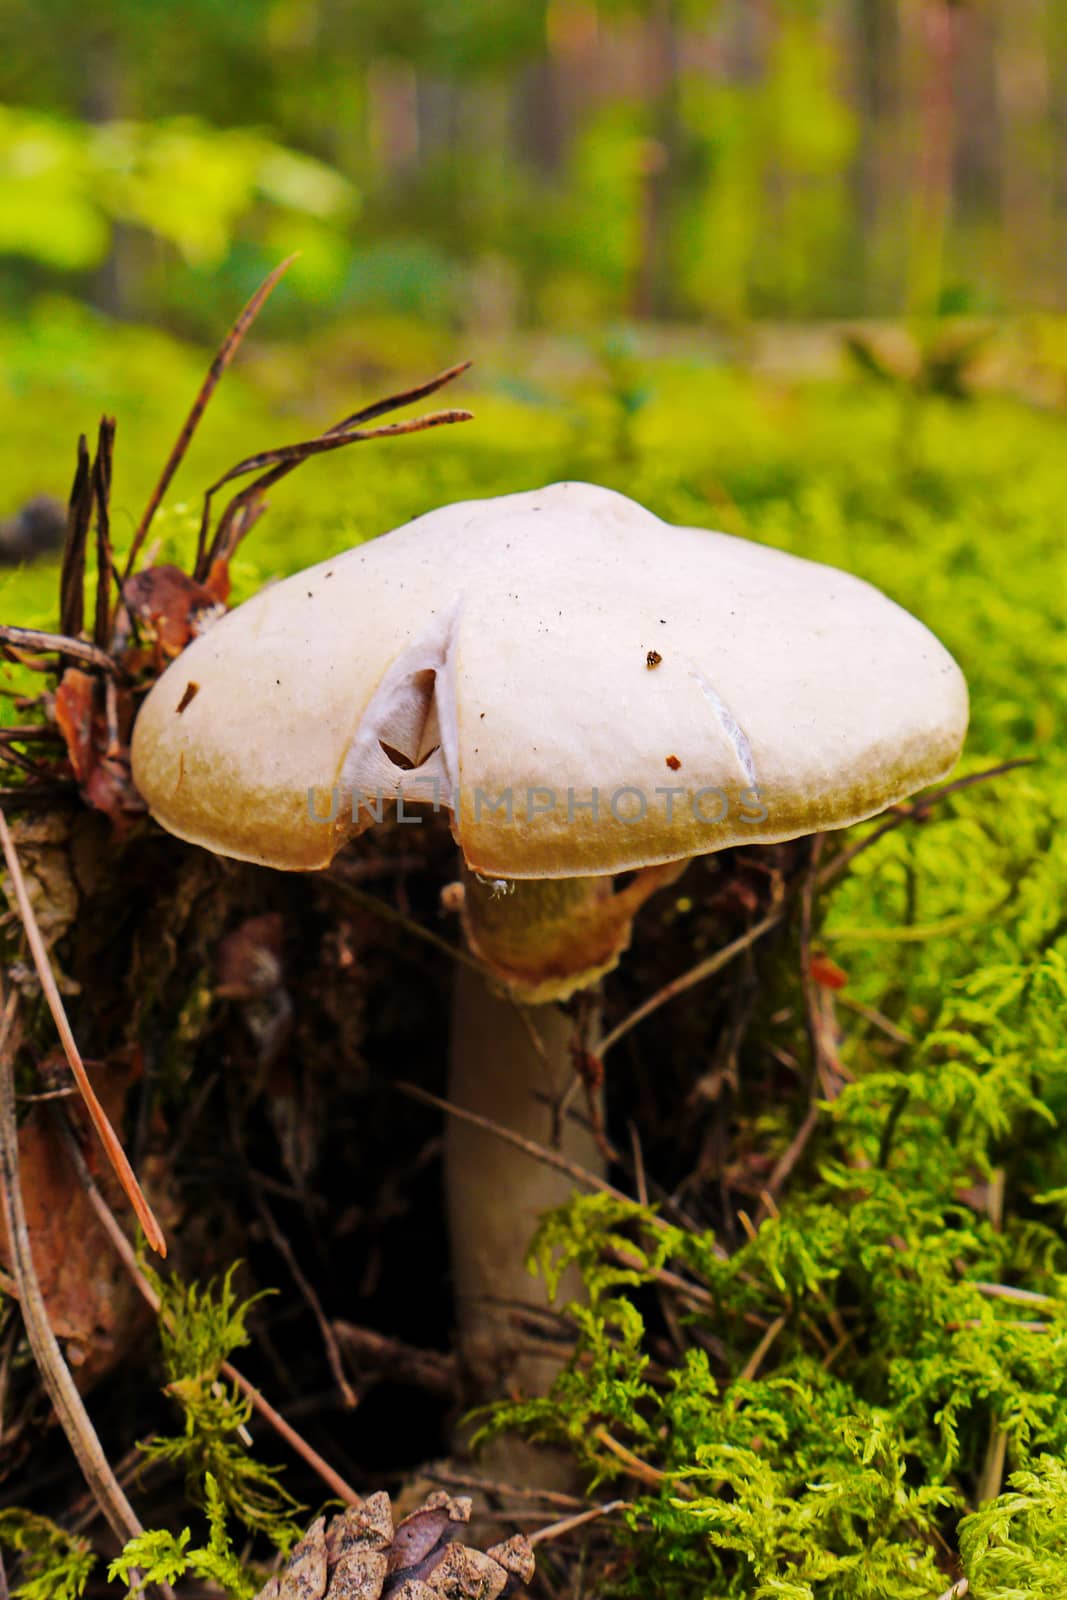 The most dangerous and poisonous pale toadstool lurking in the woods among the moss by Adamchuk